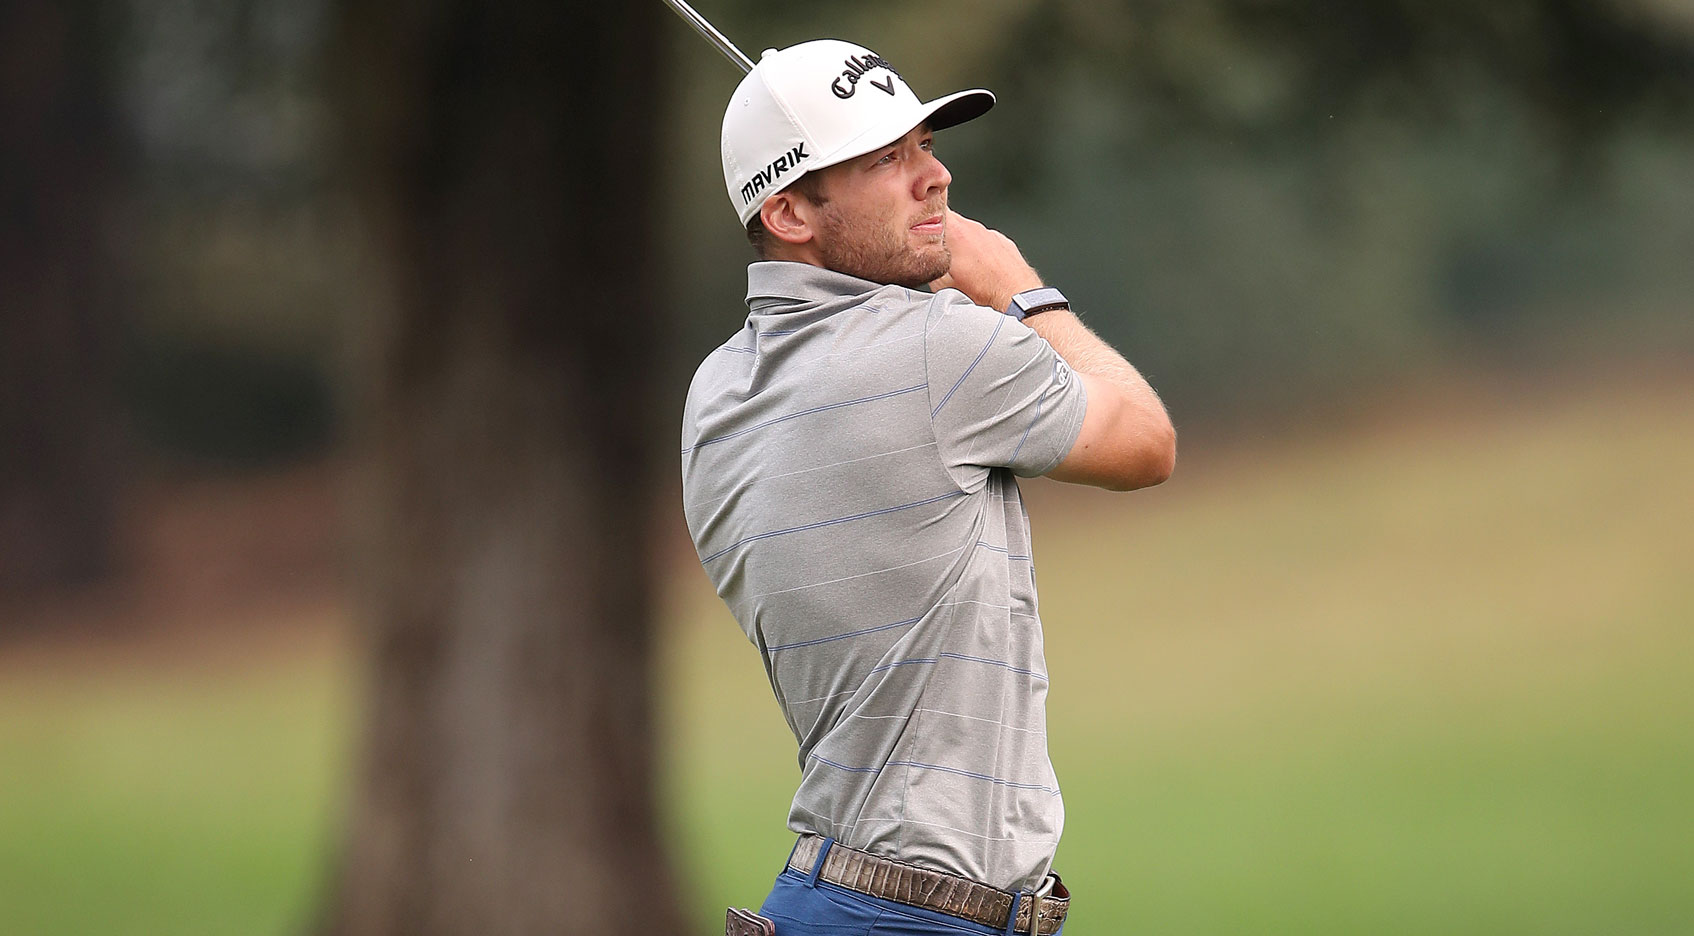 Sam burns leads by two after 36 holes at Safeway Open